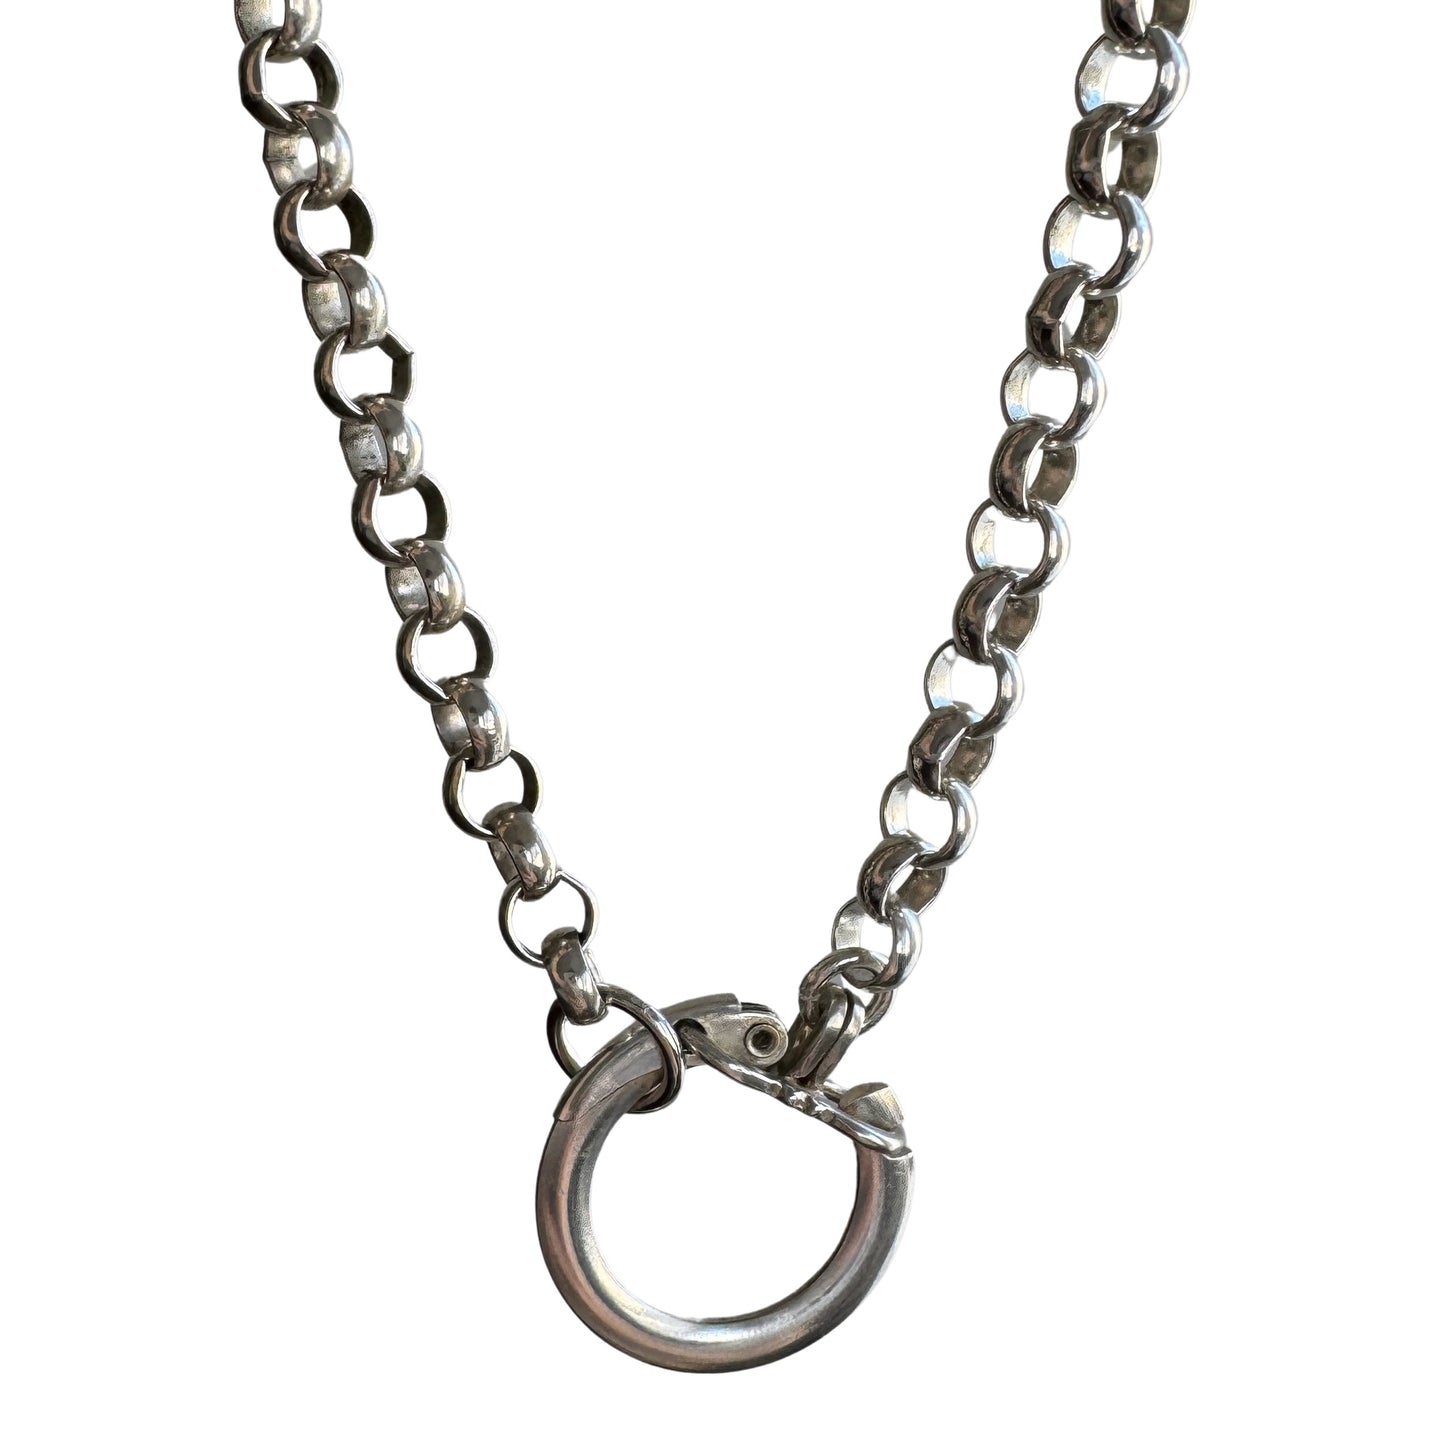 reimagined V I N T A G E // connected possibilities / sterling silver rolo chain with connector clasp / 21.75", 35g